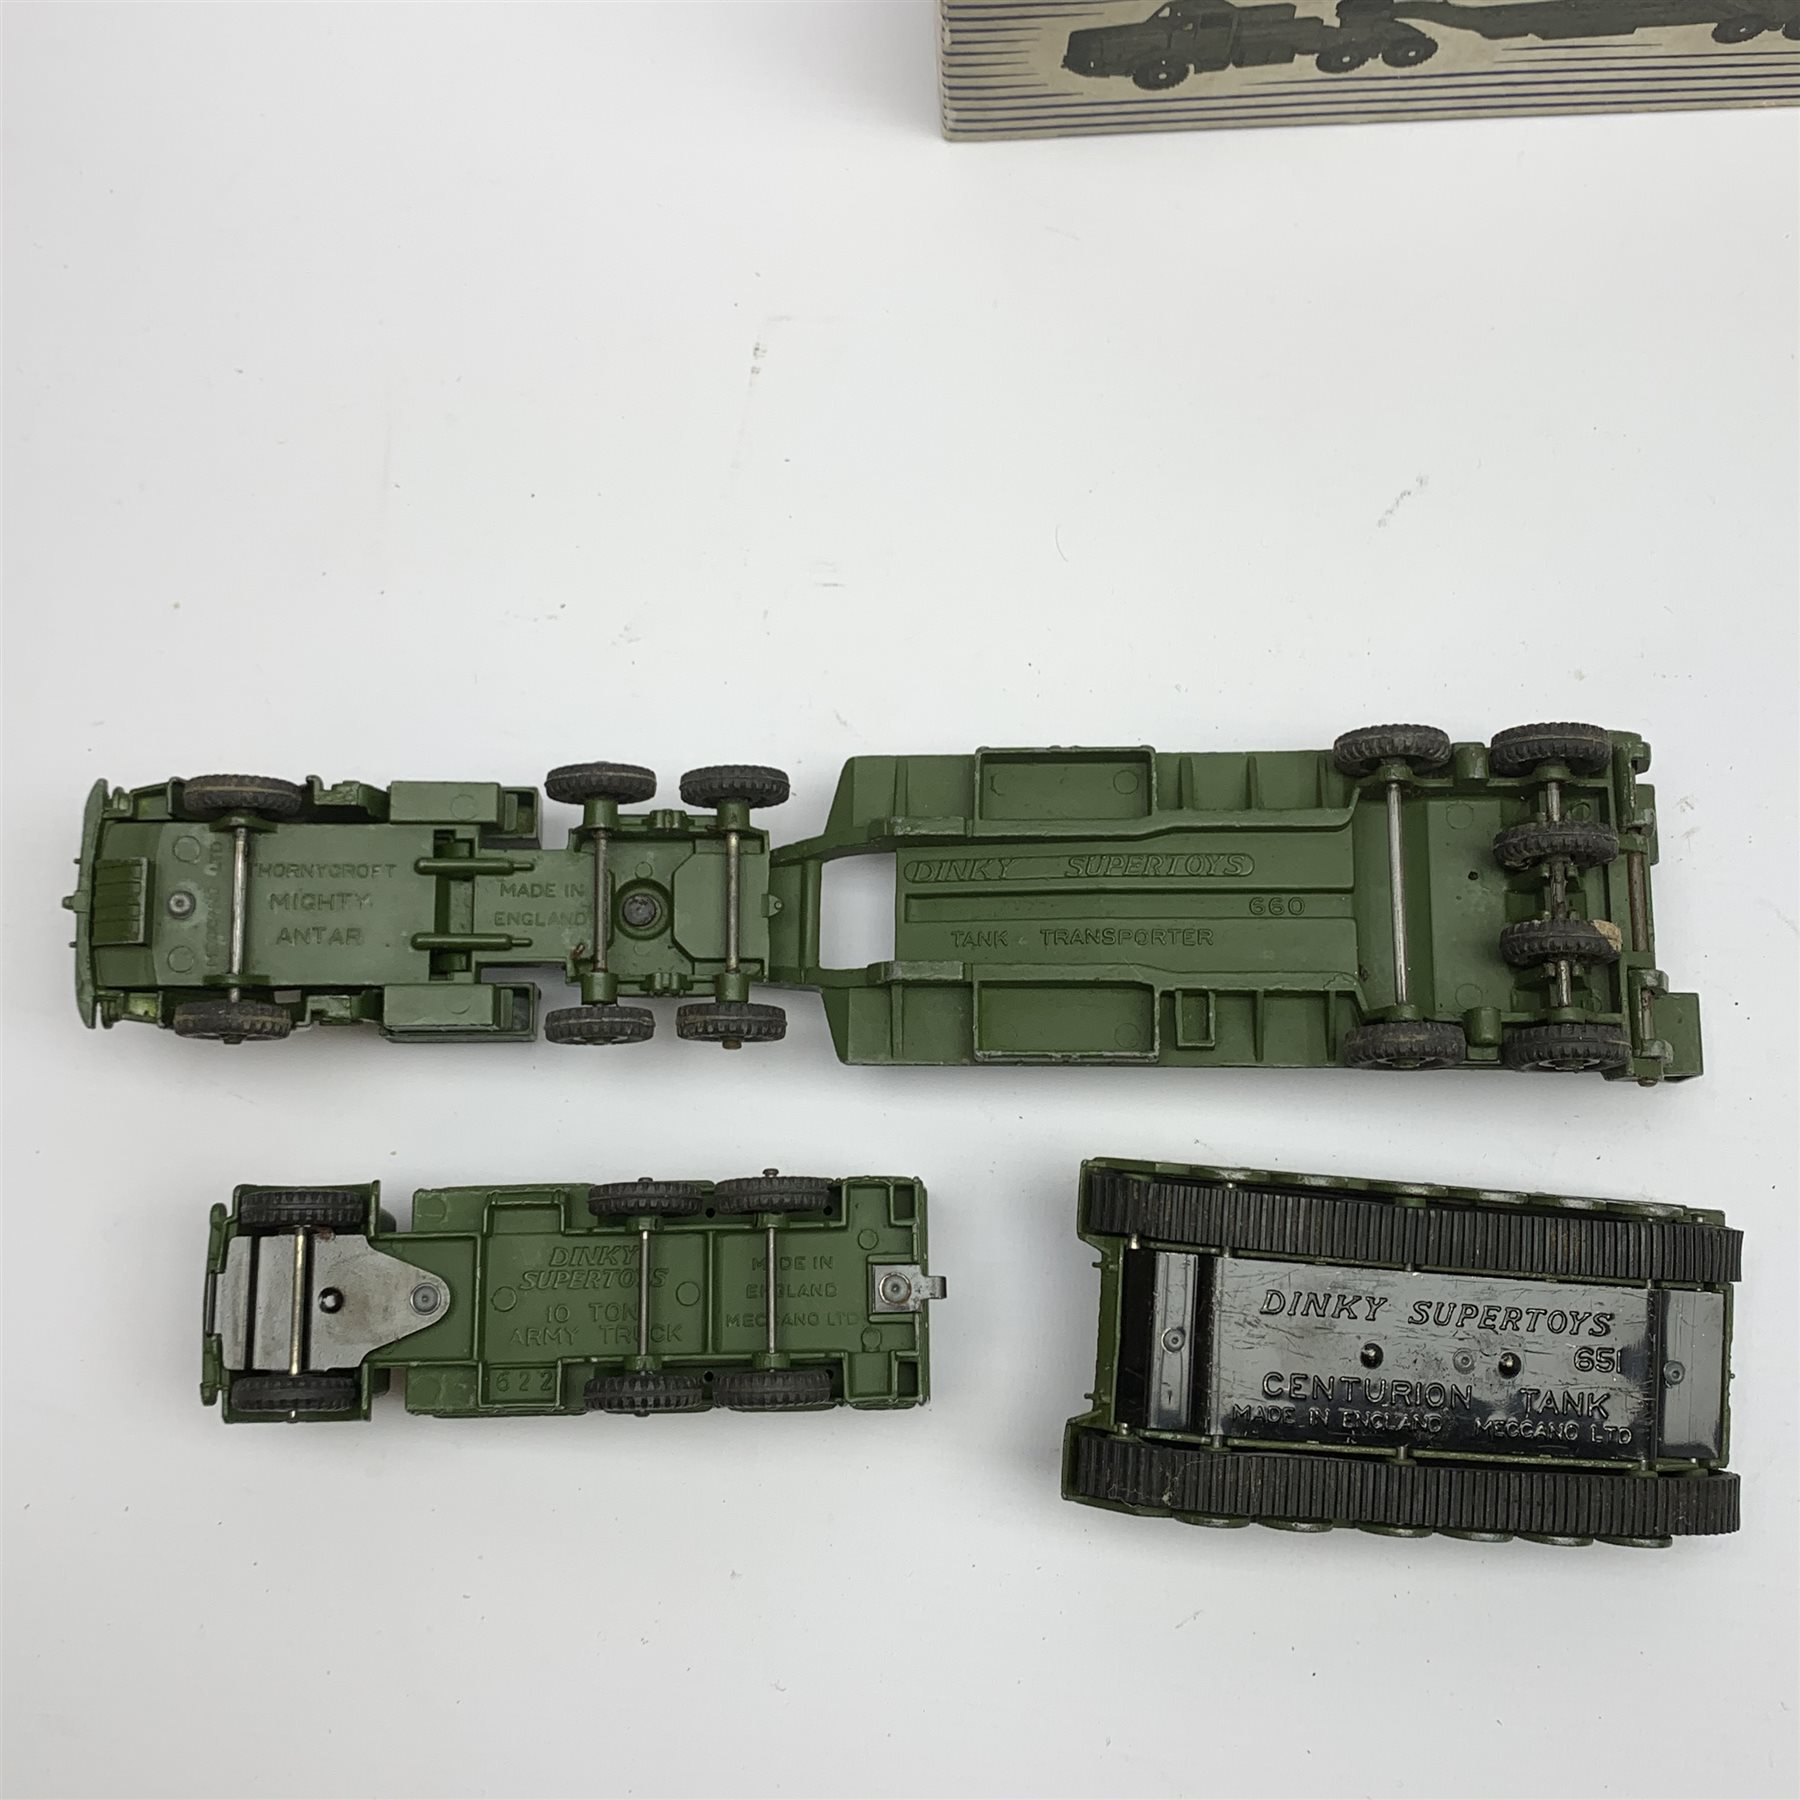 Dinky - Thornycroft Mighty Antar Tank Transporter No.660, boxed with internal packaging; Centurion T - Image 3 of 9